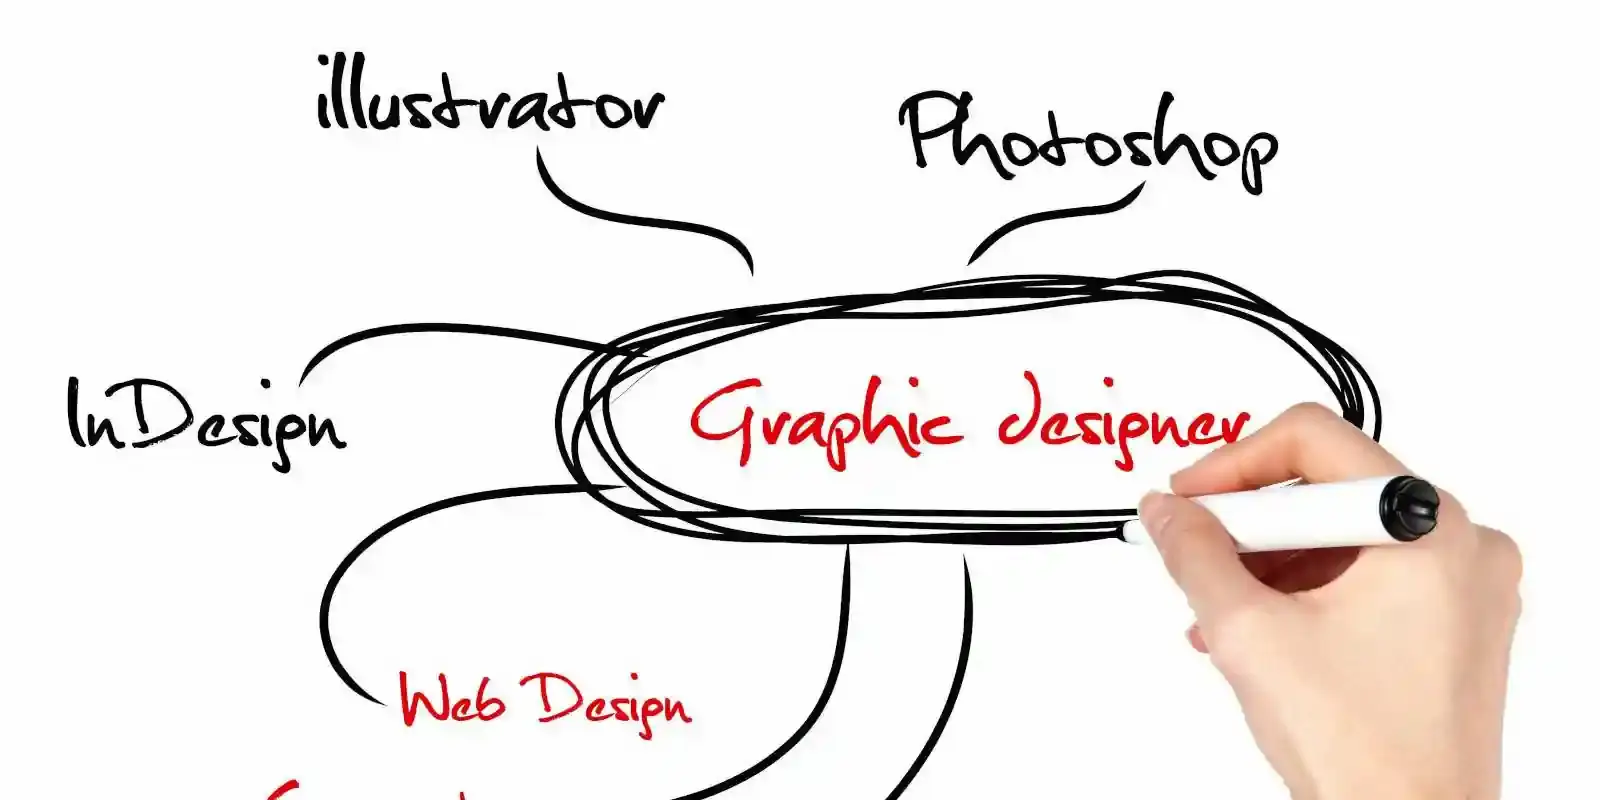 womans hand with black marker writing graphic designer on whiteboard